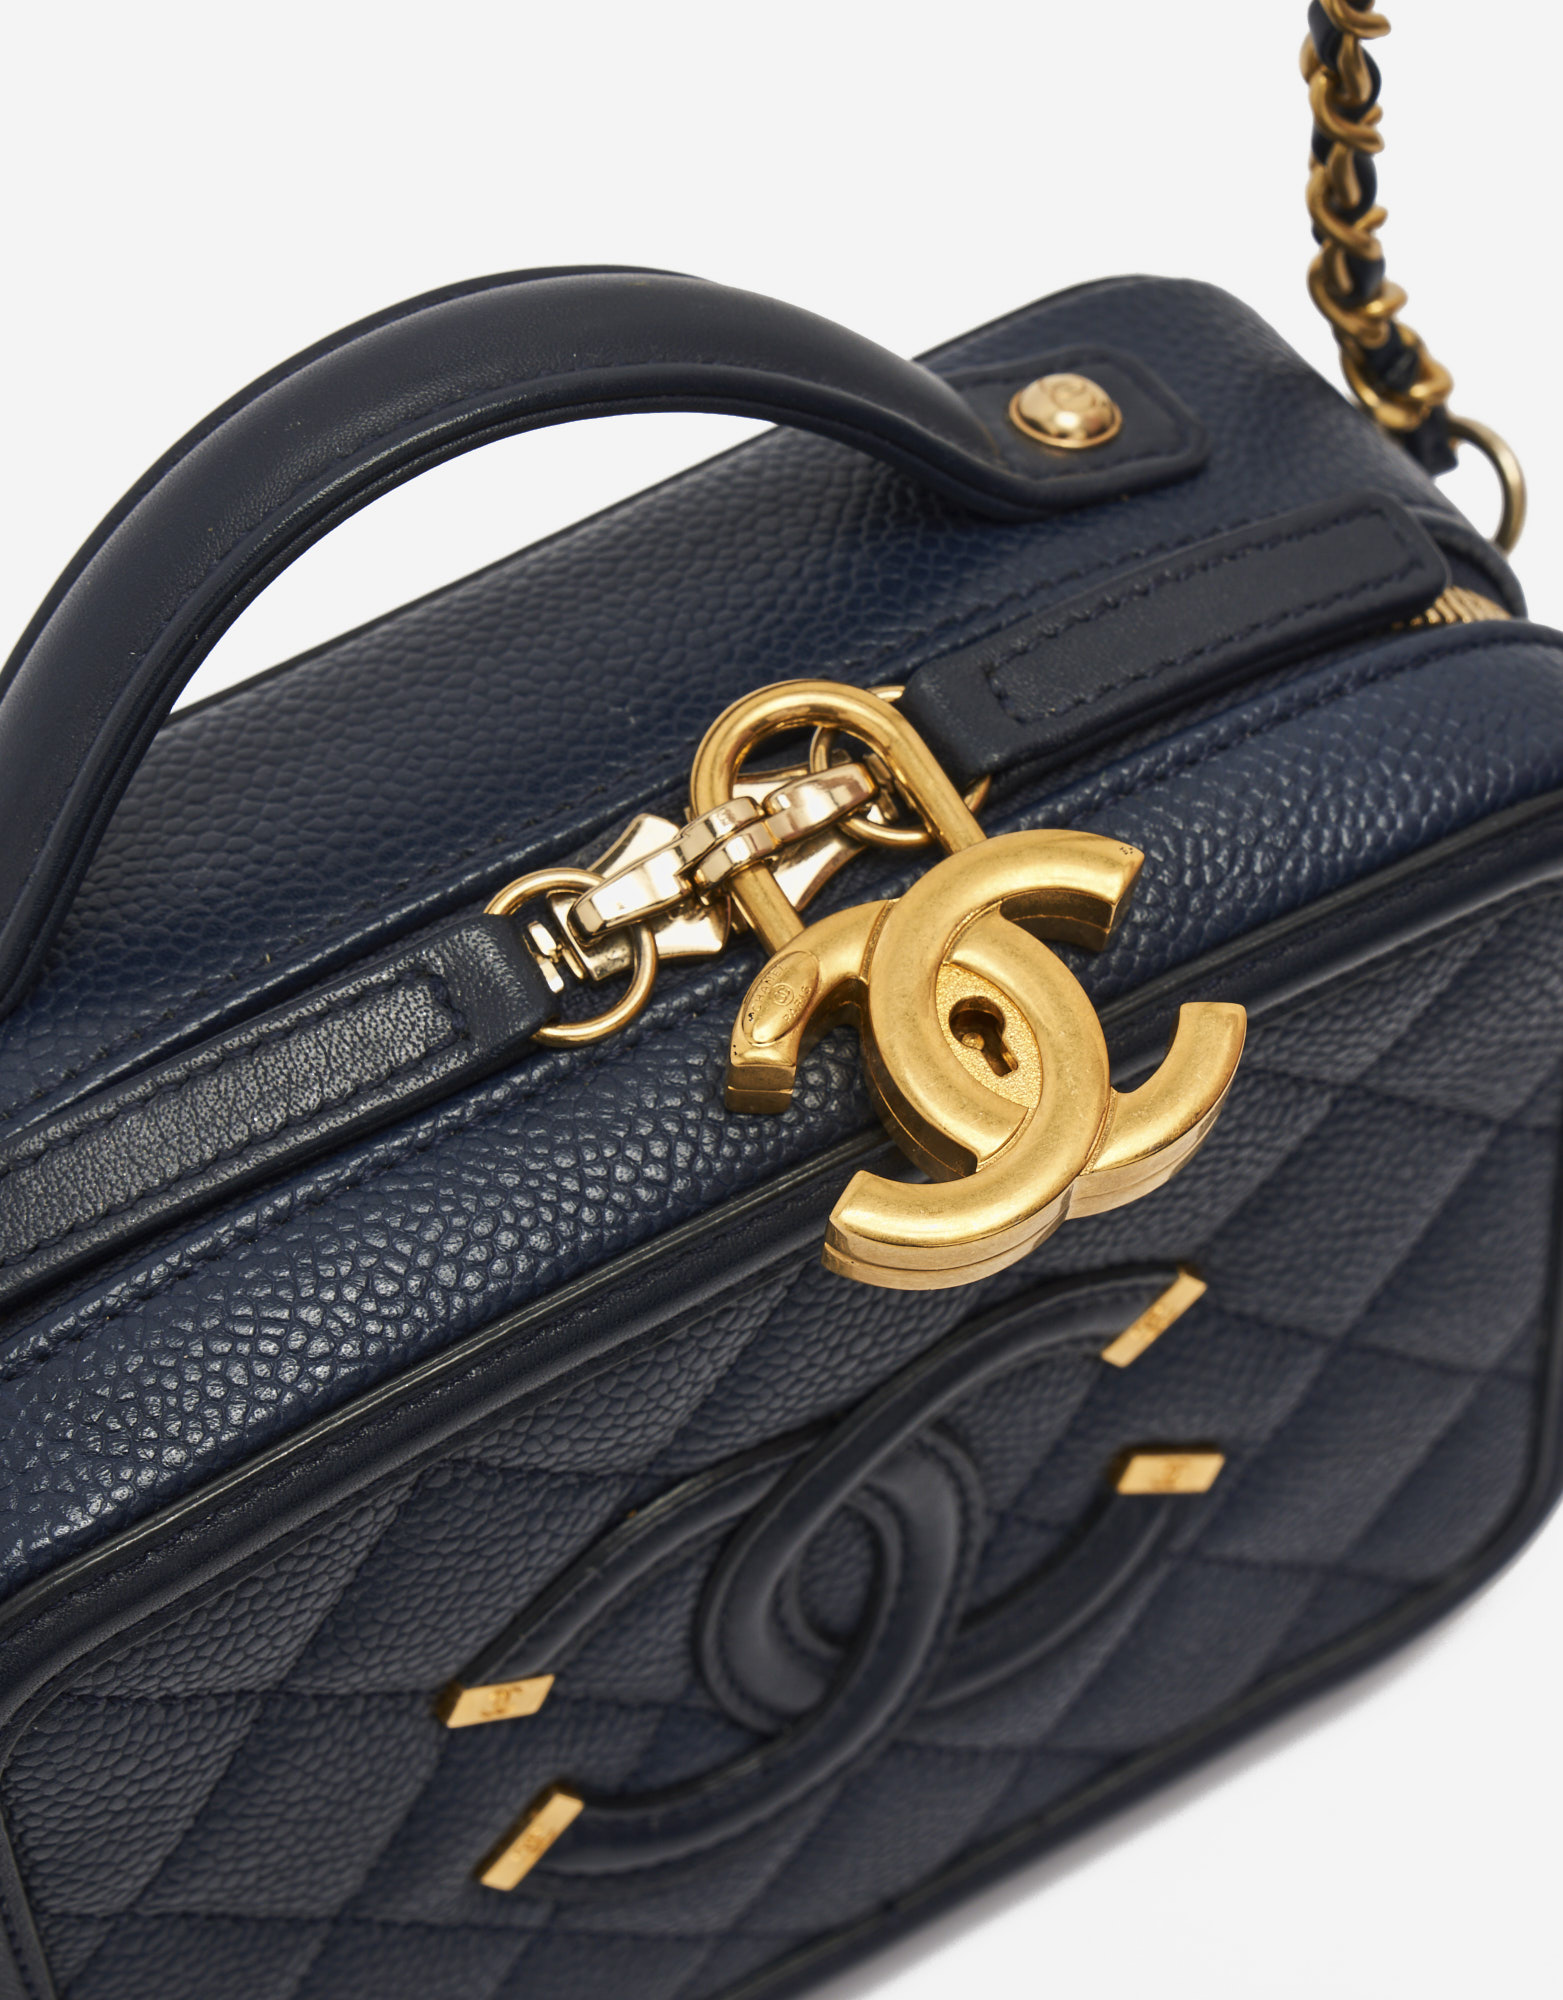 CC Charm Detail on a pre-loved Chanel Vanity Case Small Caviar Leather in Dark Blue on SACLÀB